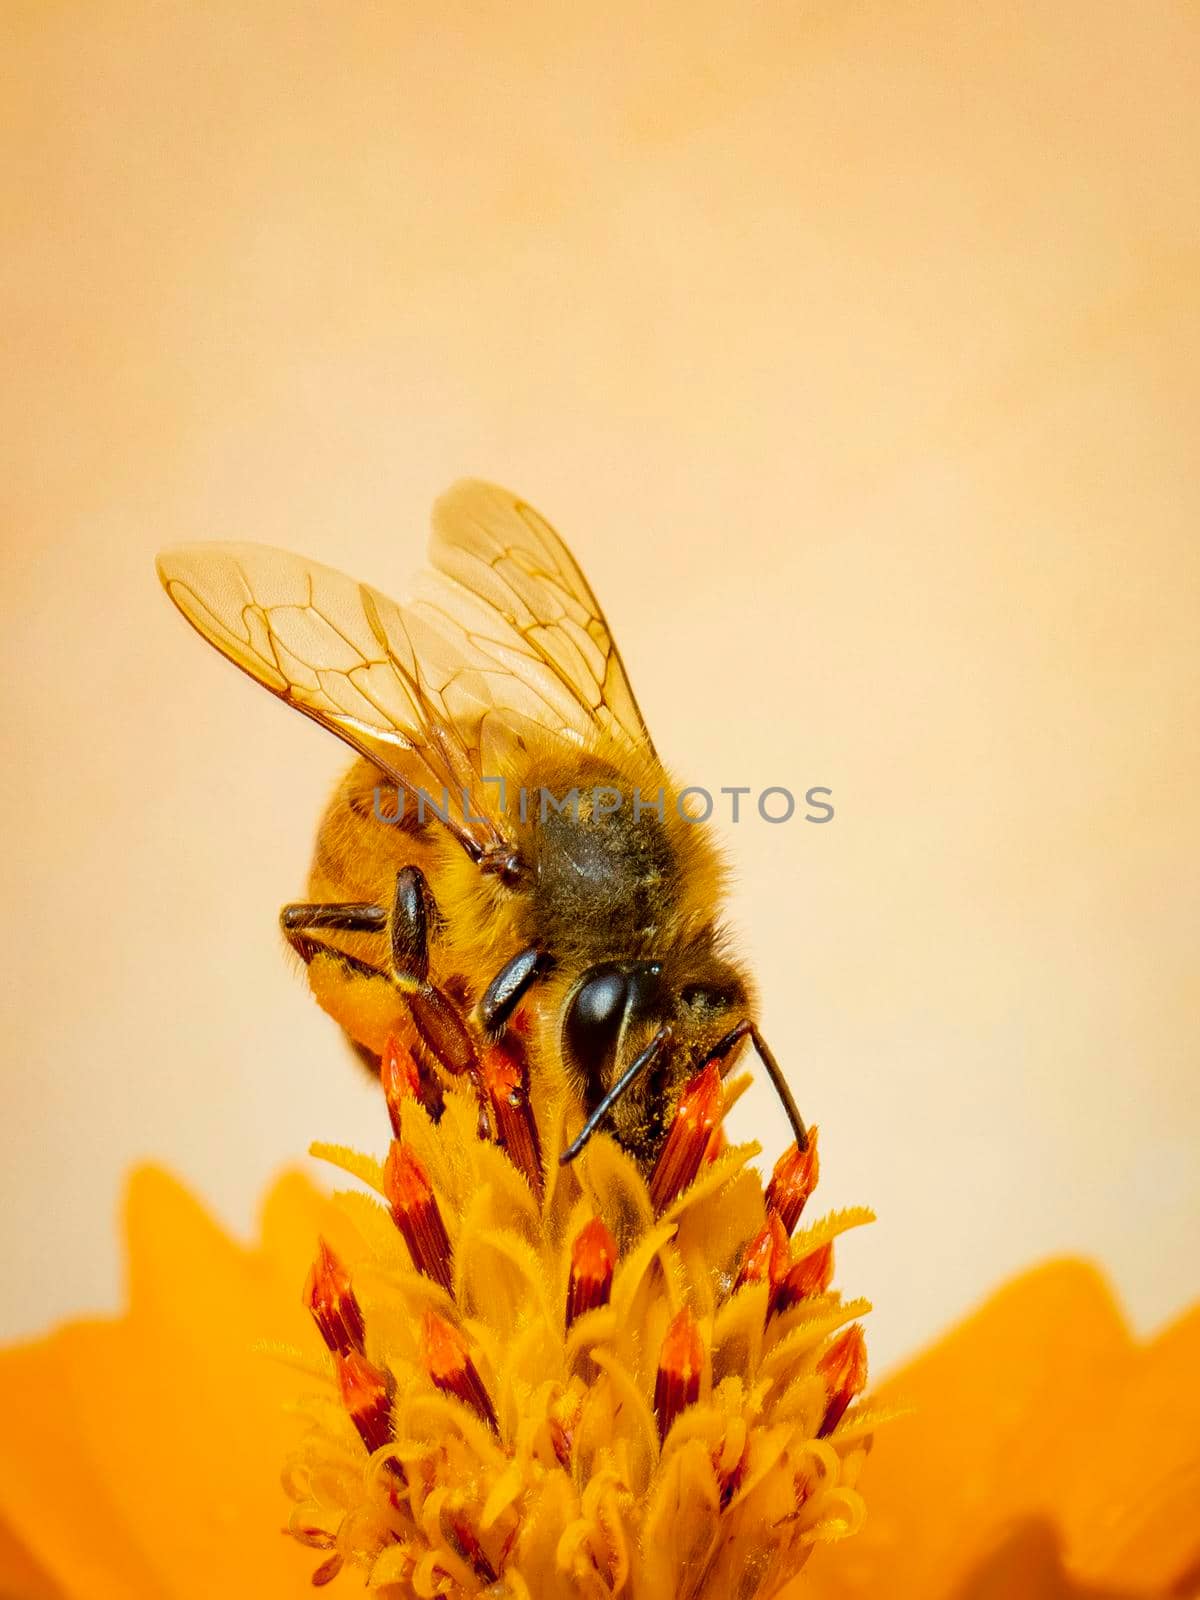 Image of bee or honeybee on yellow flower collects nectar. Golden honeybee on flower pollen with space blur background for text. Insect. Animal by yod67